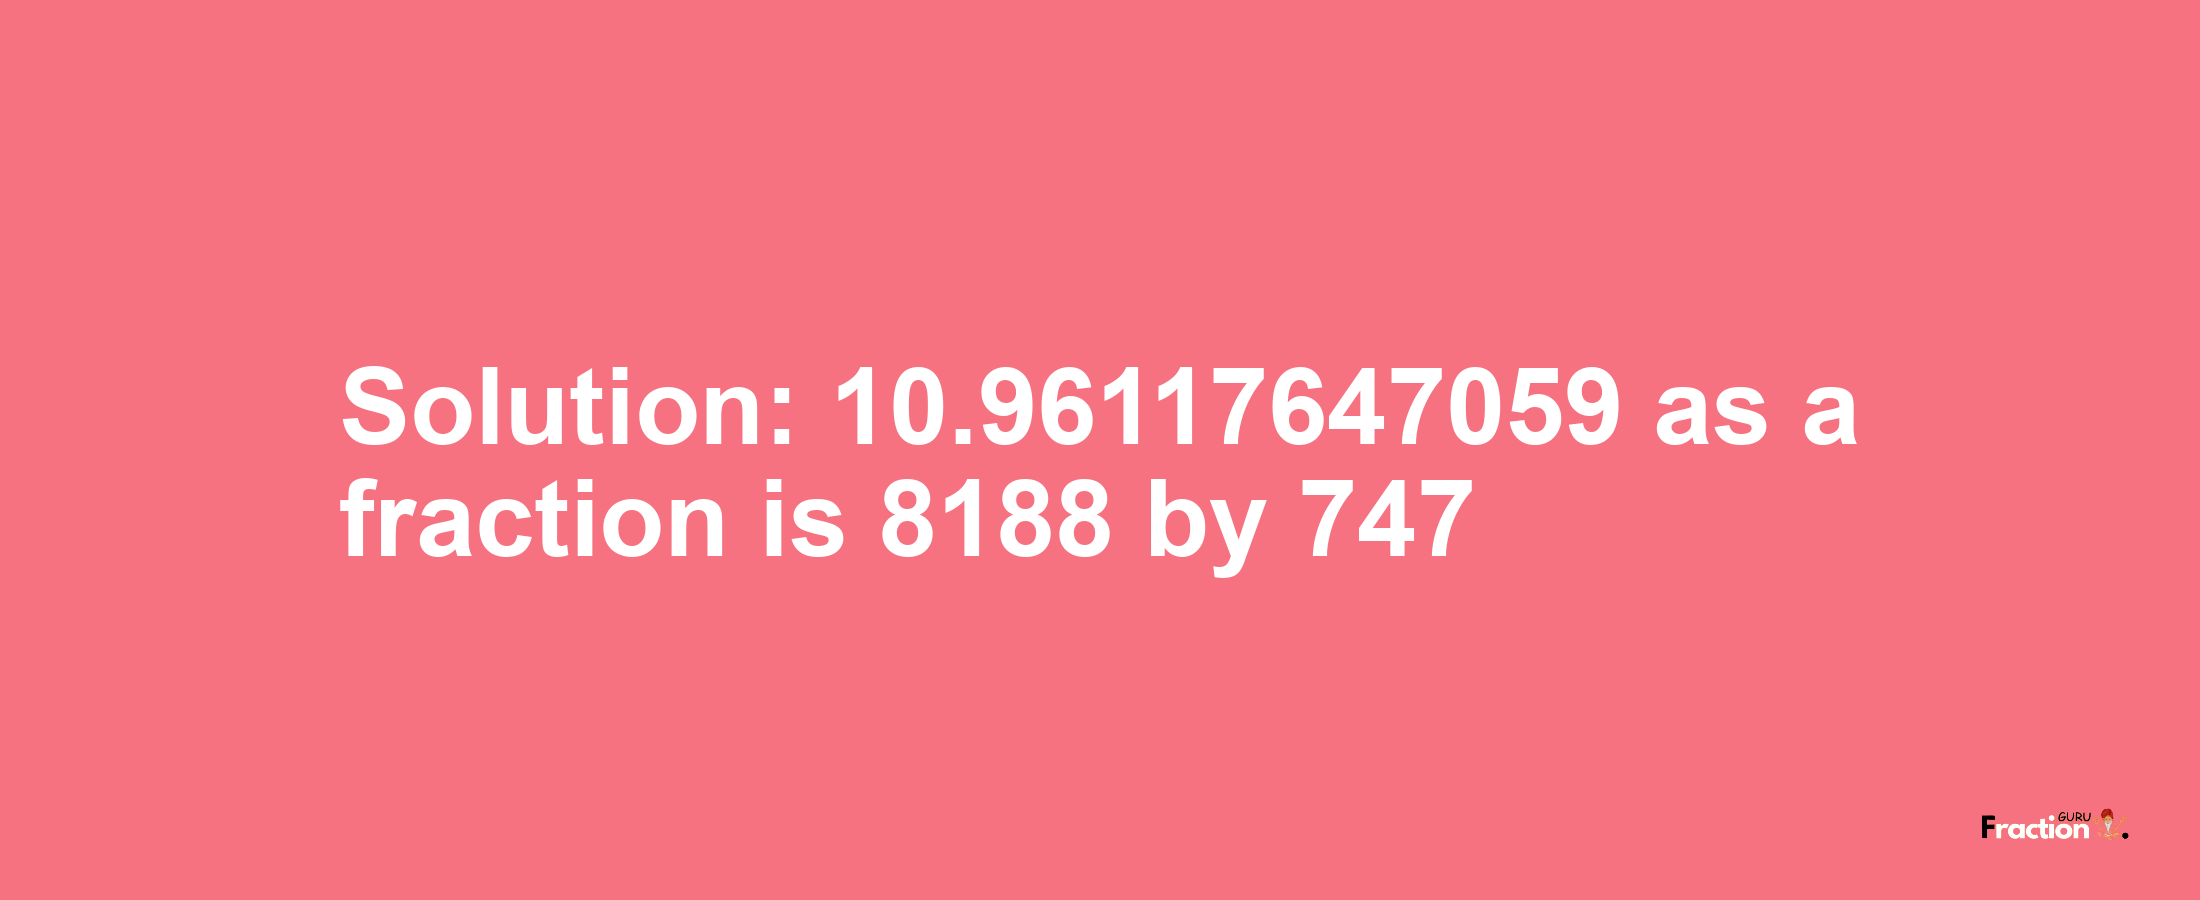 Solution:10.96117647059 as a fraction is 8188/747